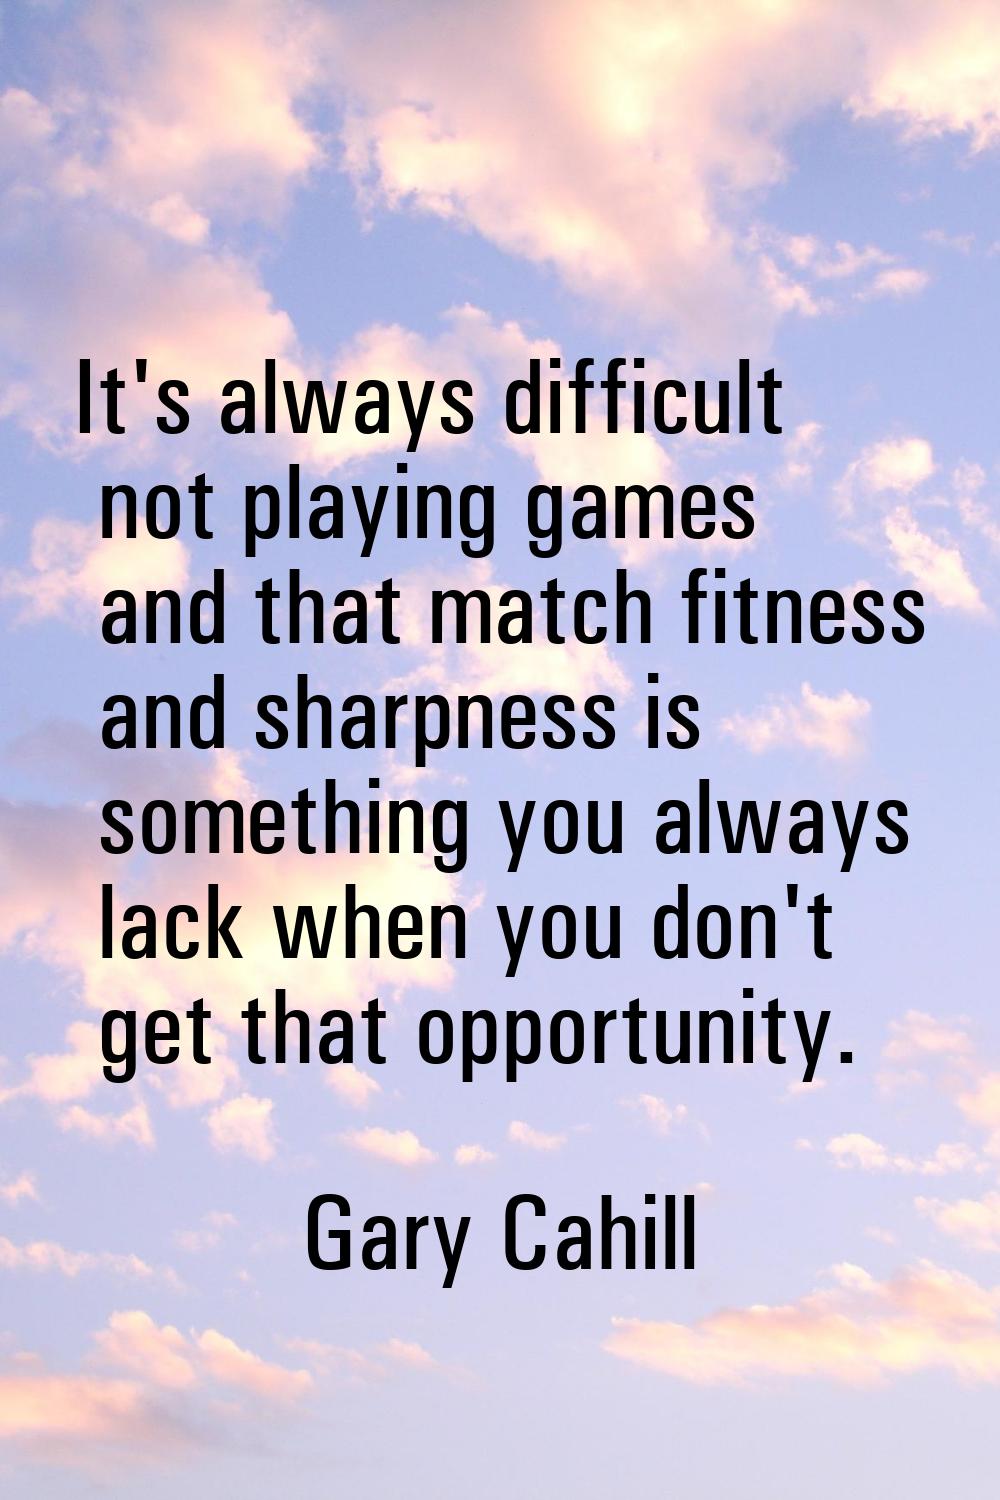 It's always difficult not playing games and that match fitness and sharpness is something you alway